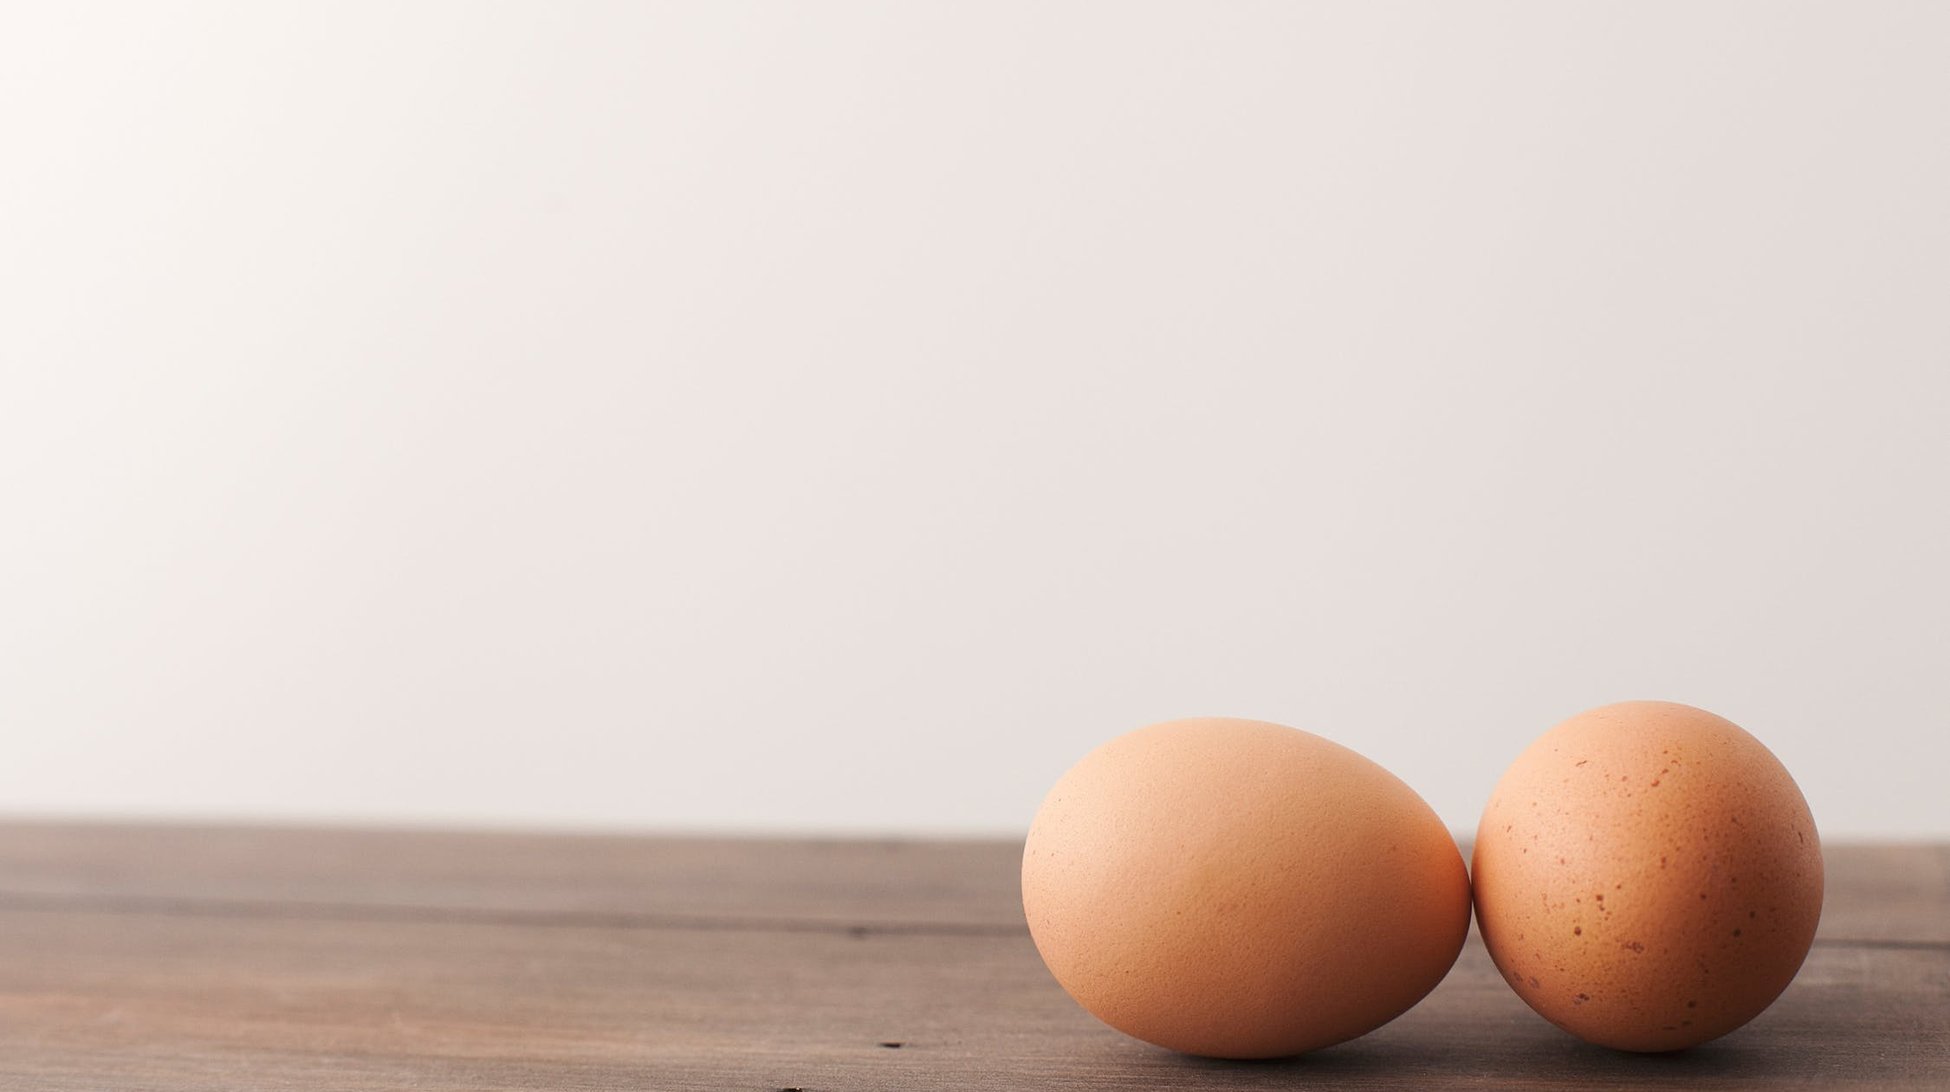 Your Qs: Is it okay to eat eggs every day?